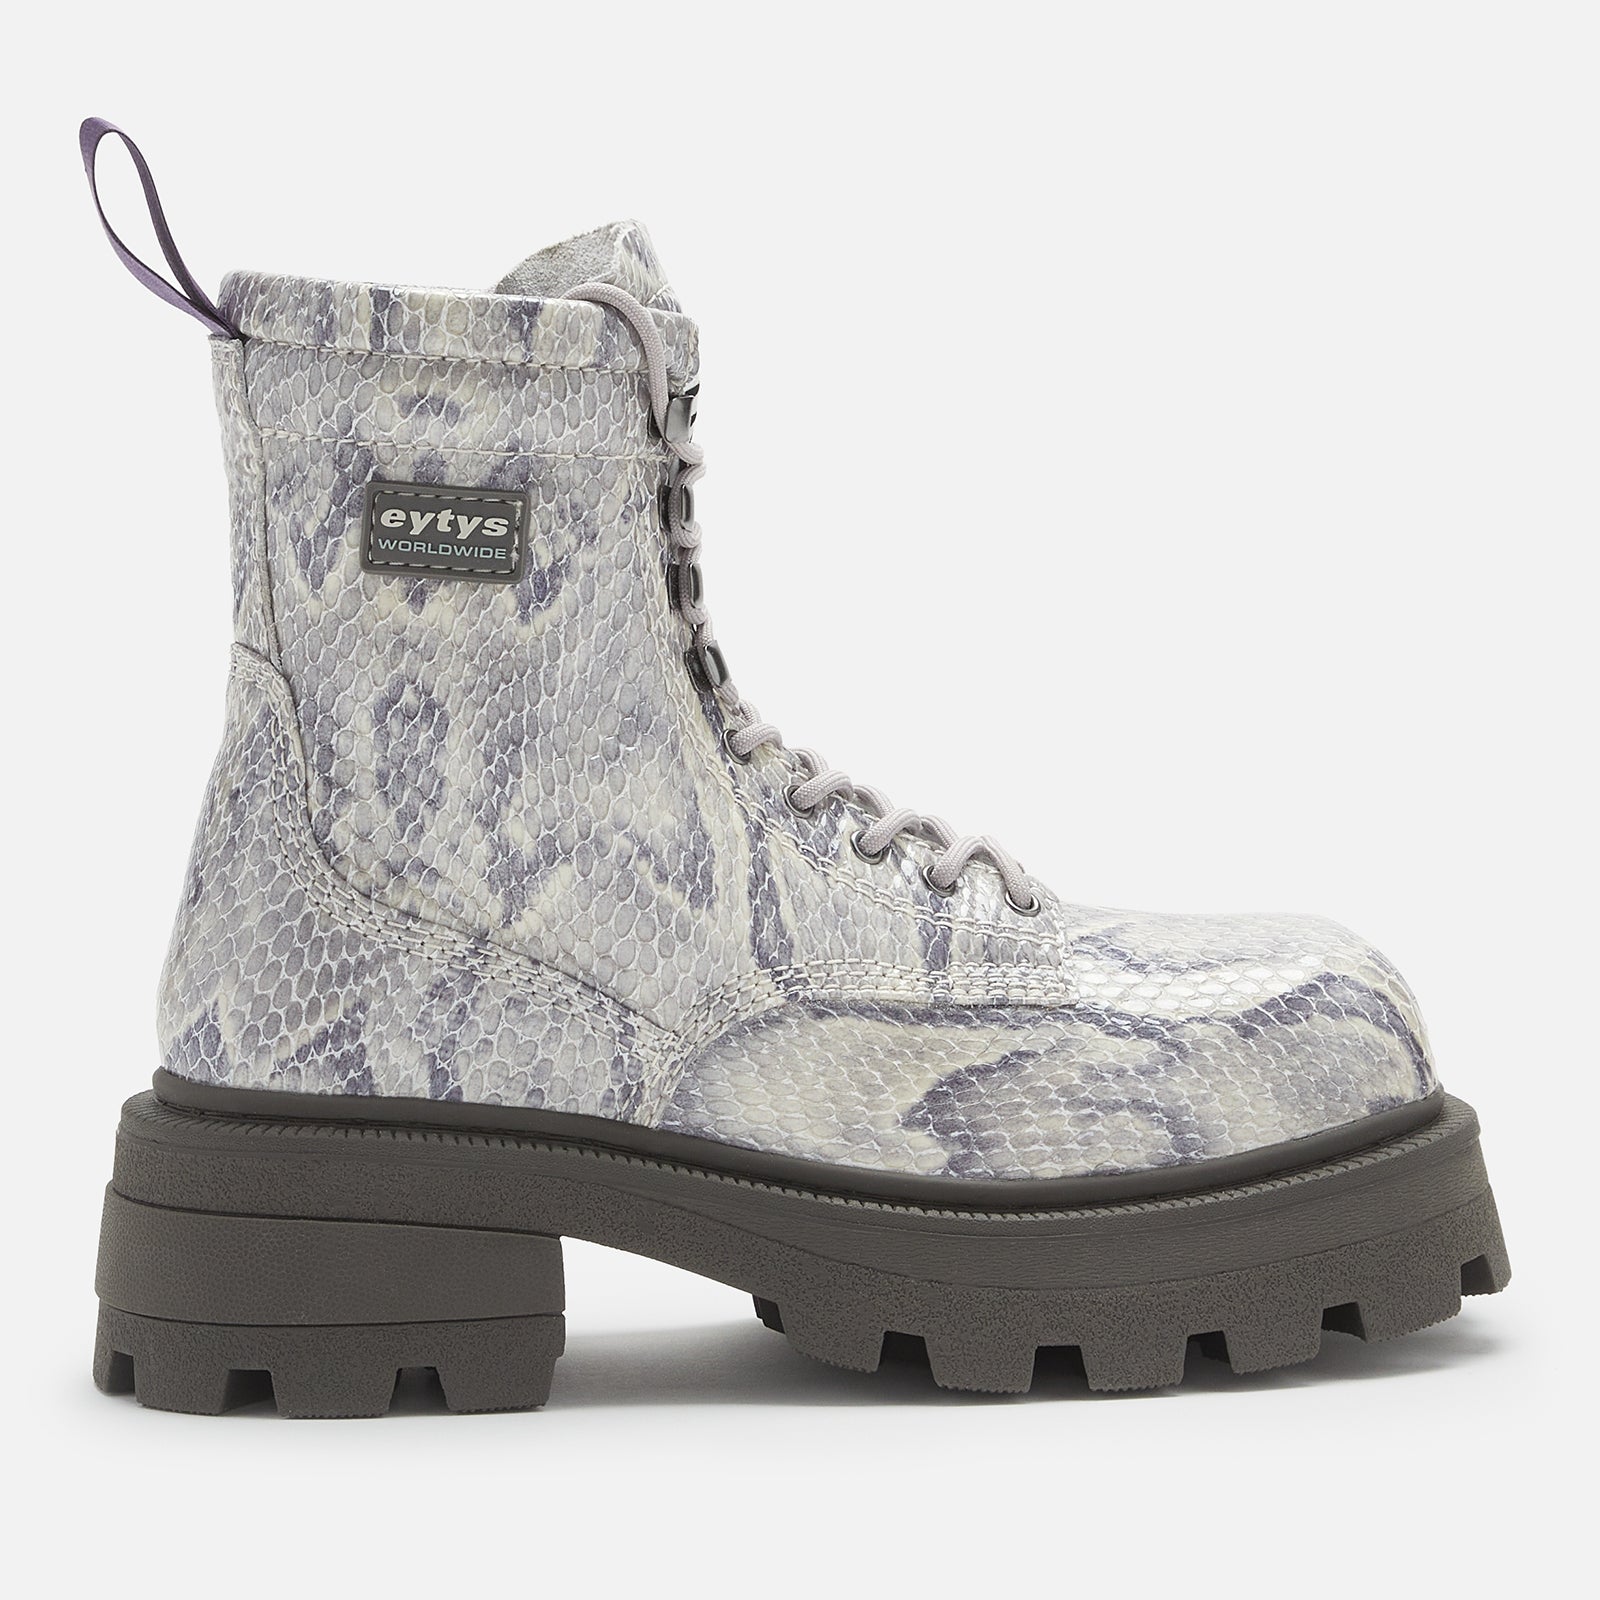 Eytys Women's Michigan Snake Print Lace Up Boots - Grey - Image 1